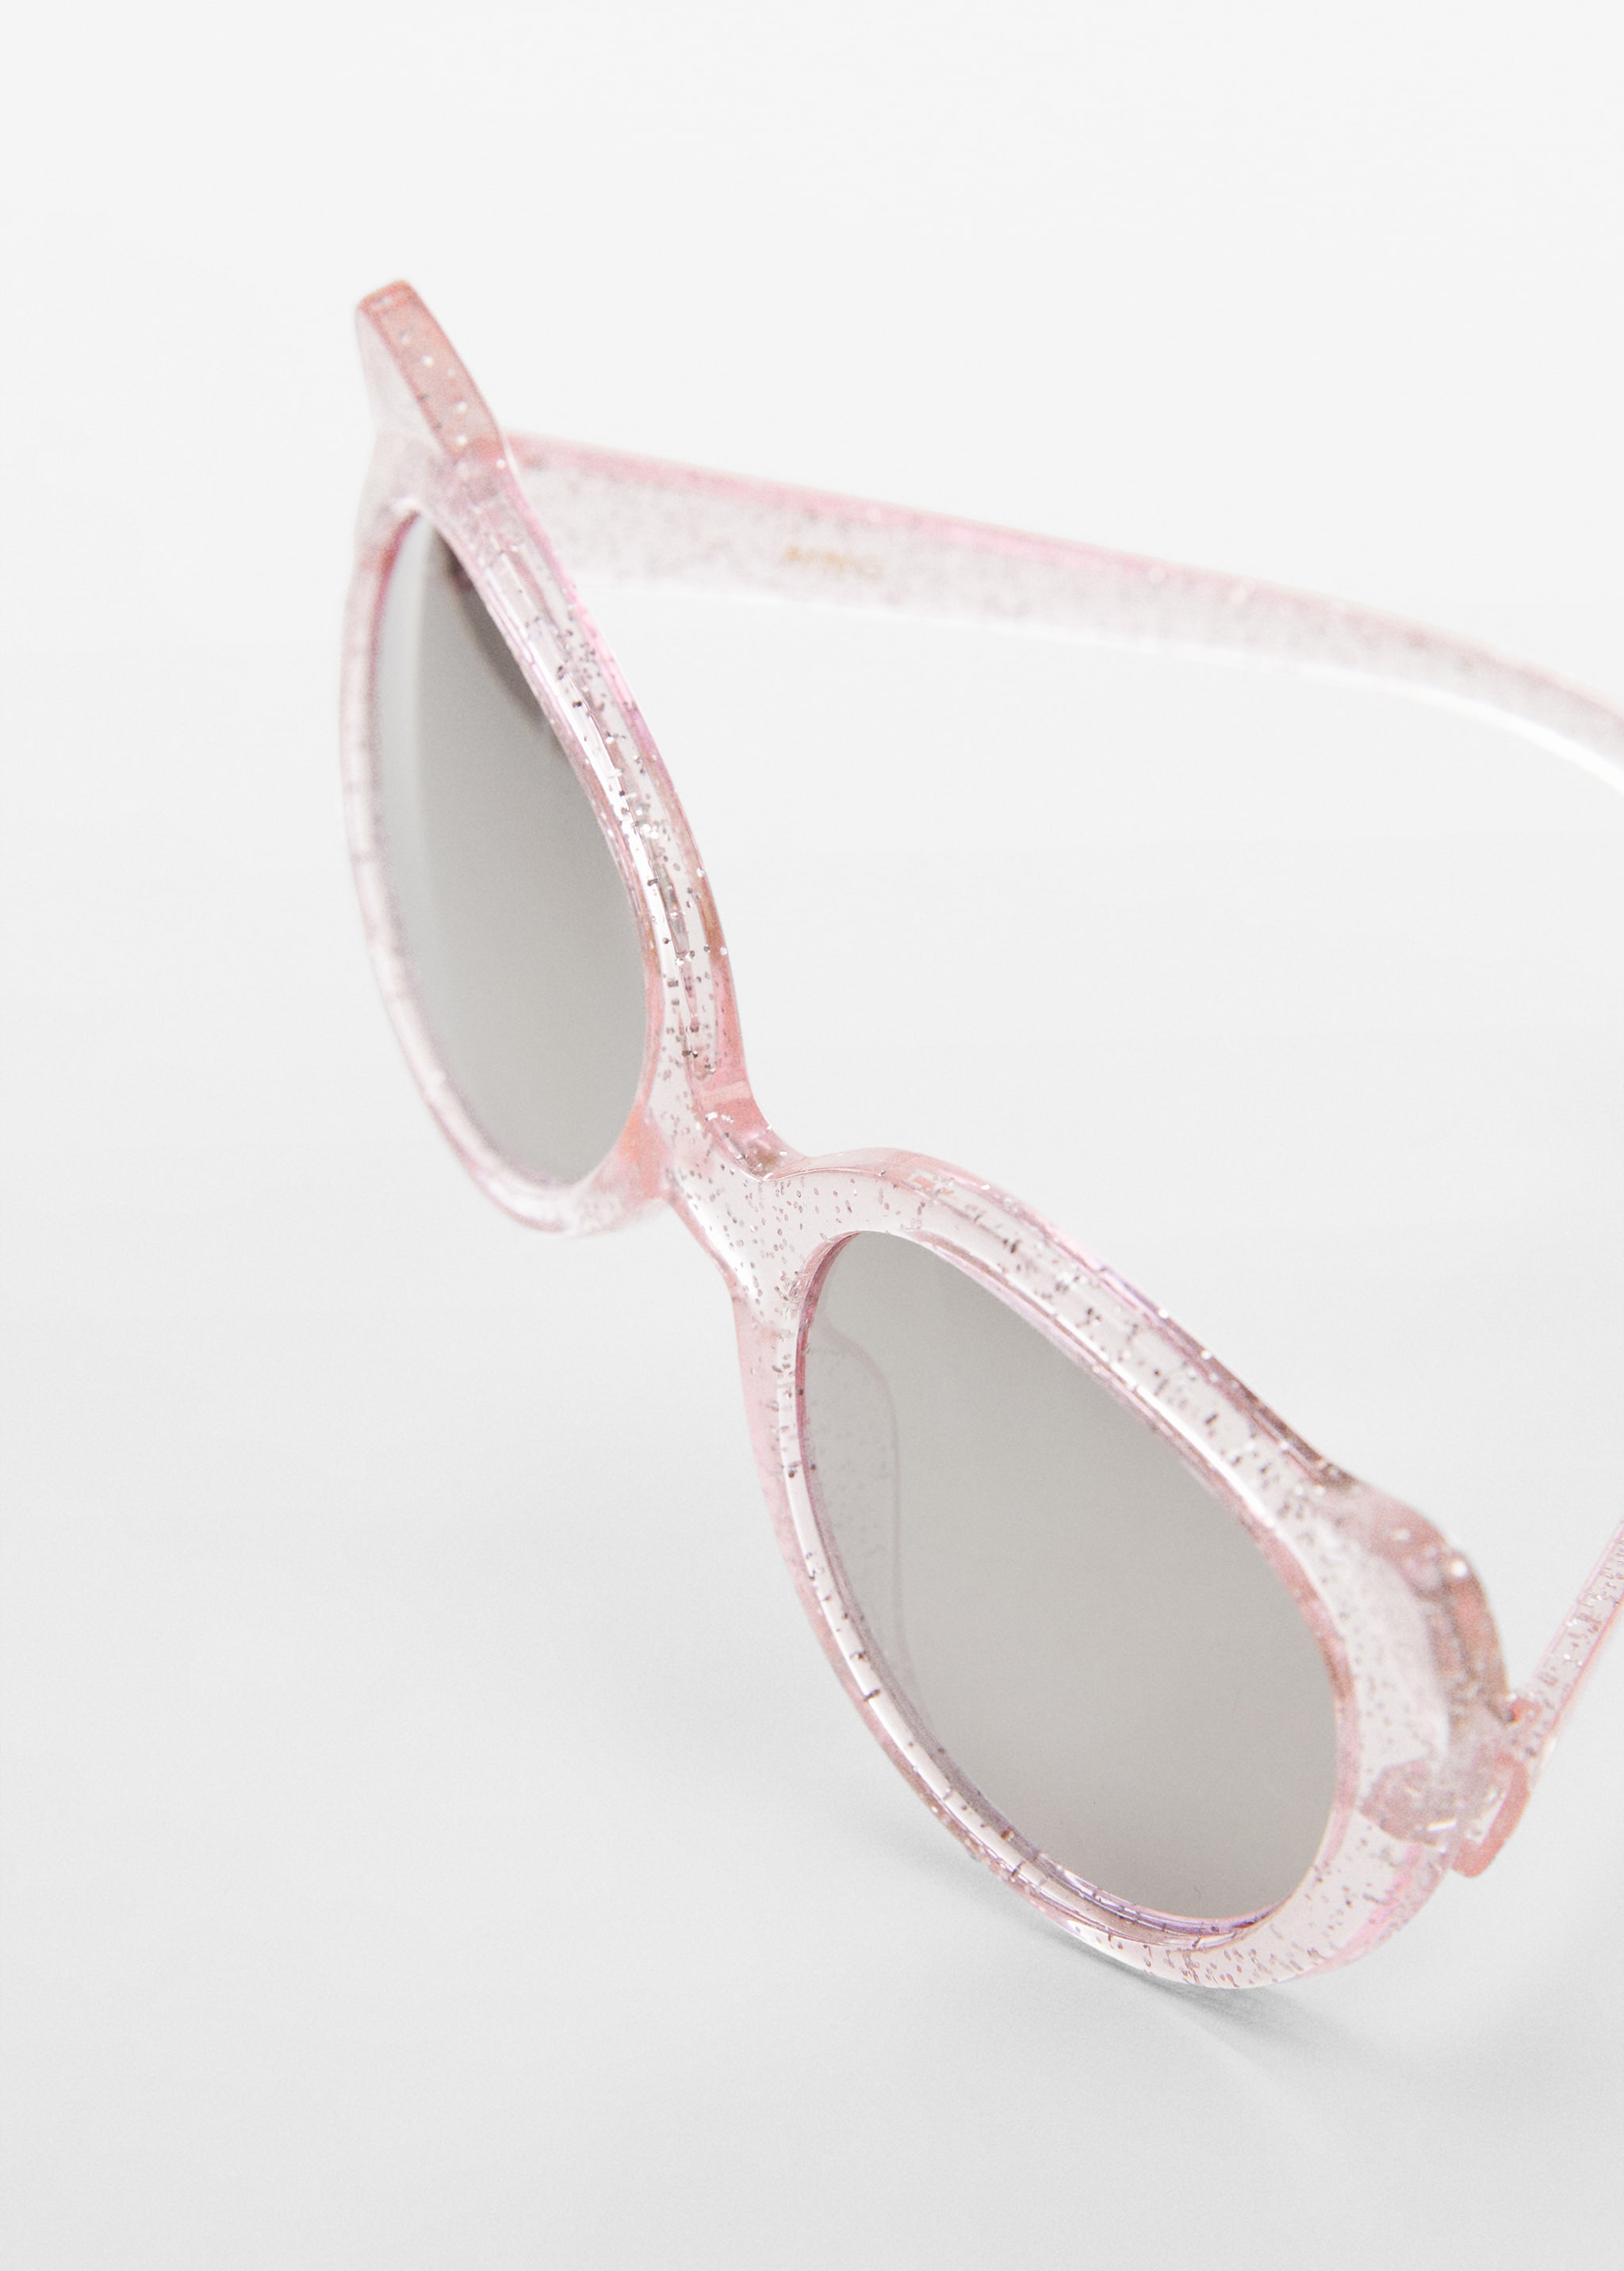 Cat-eye sunglasses - Details of the article 2